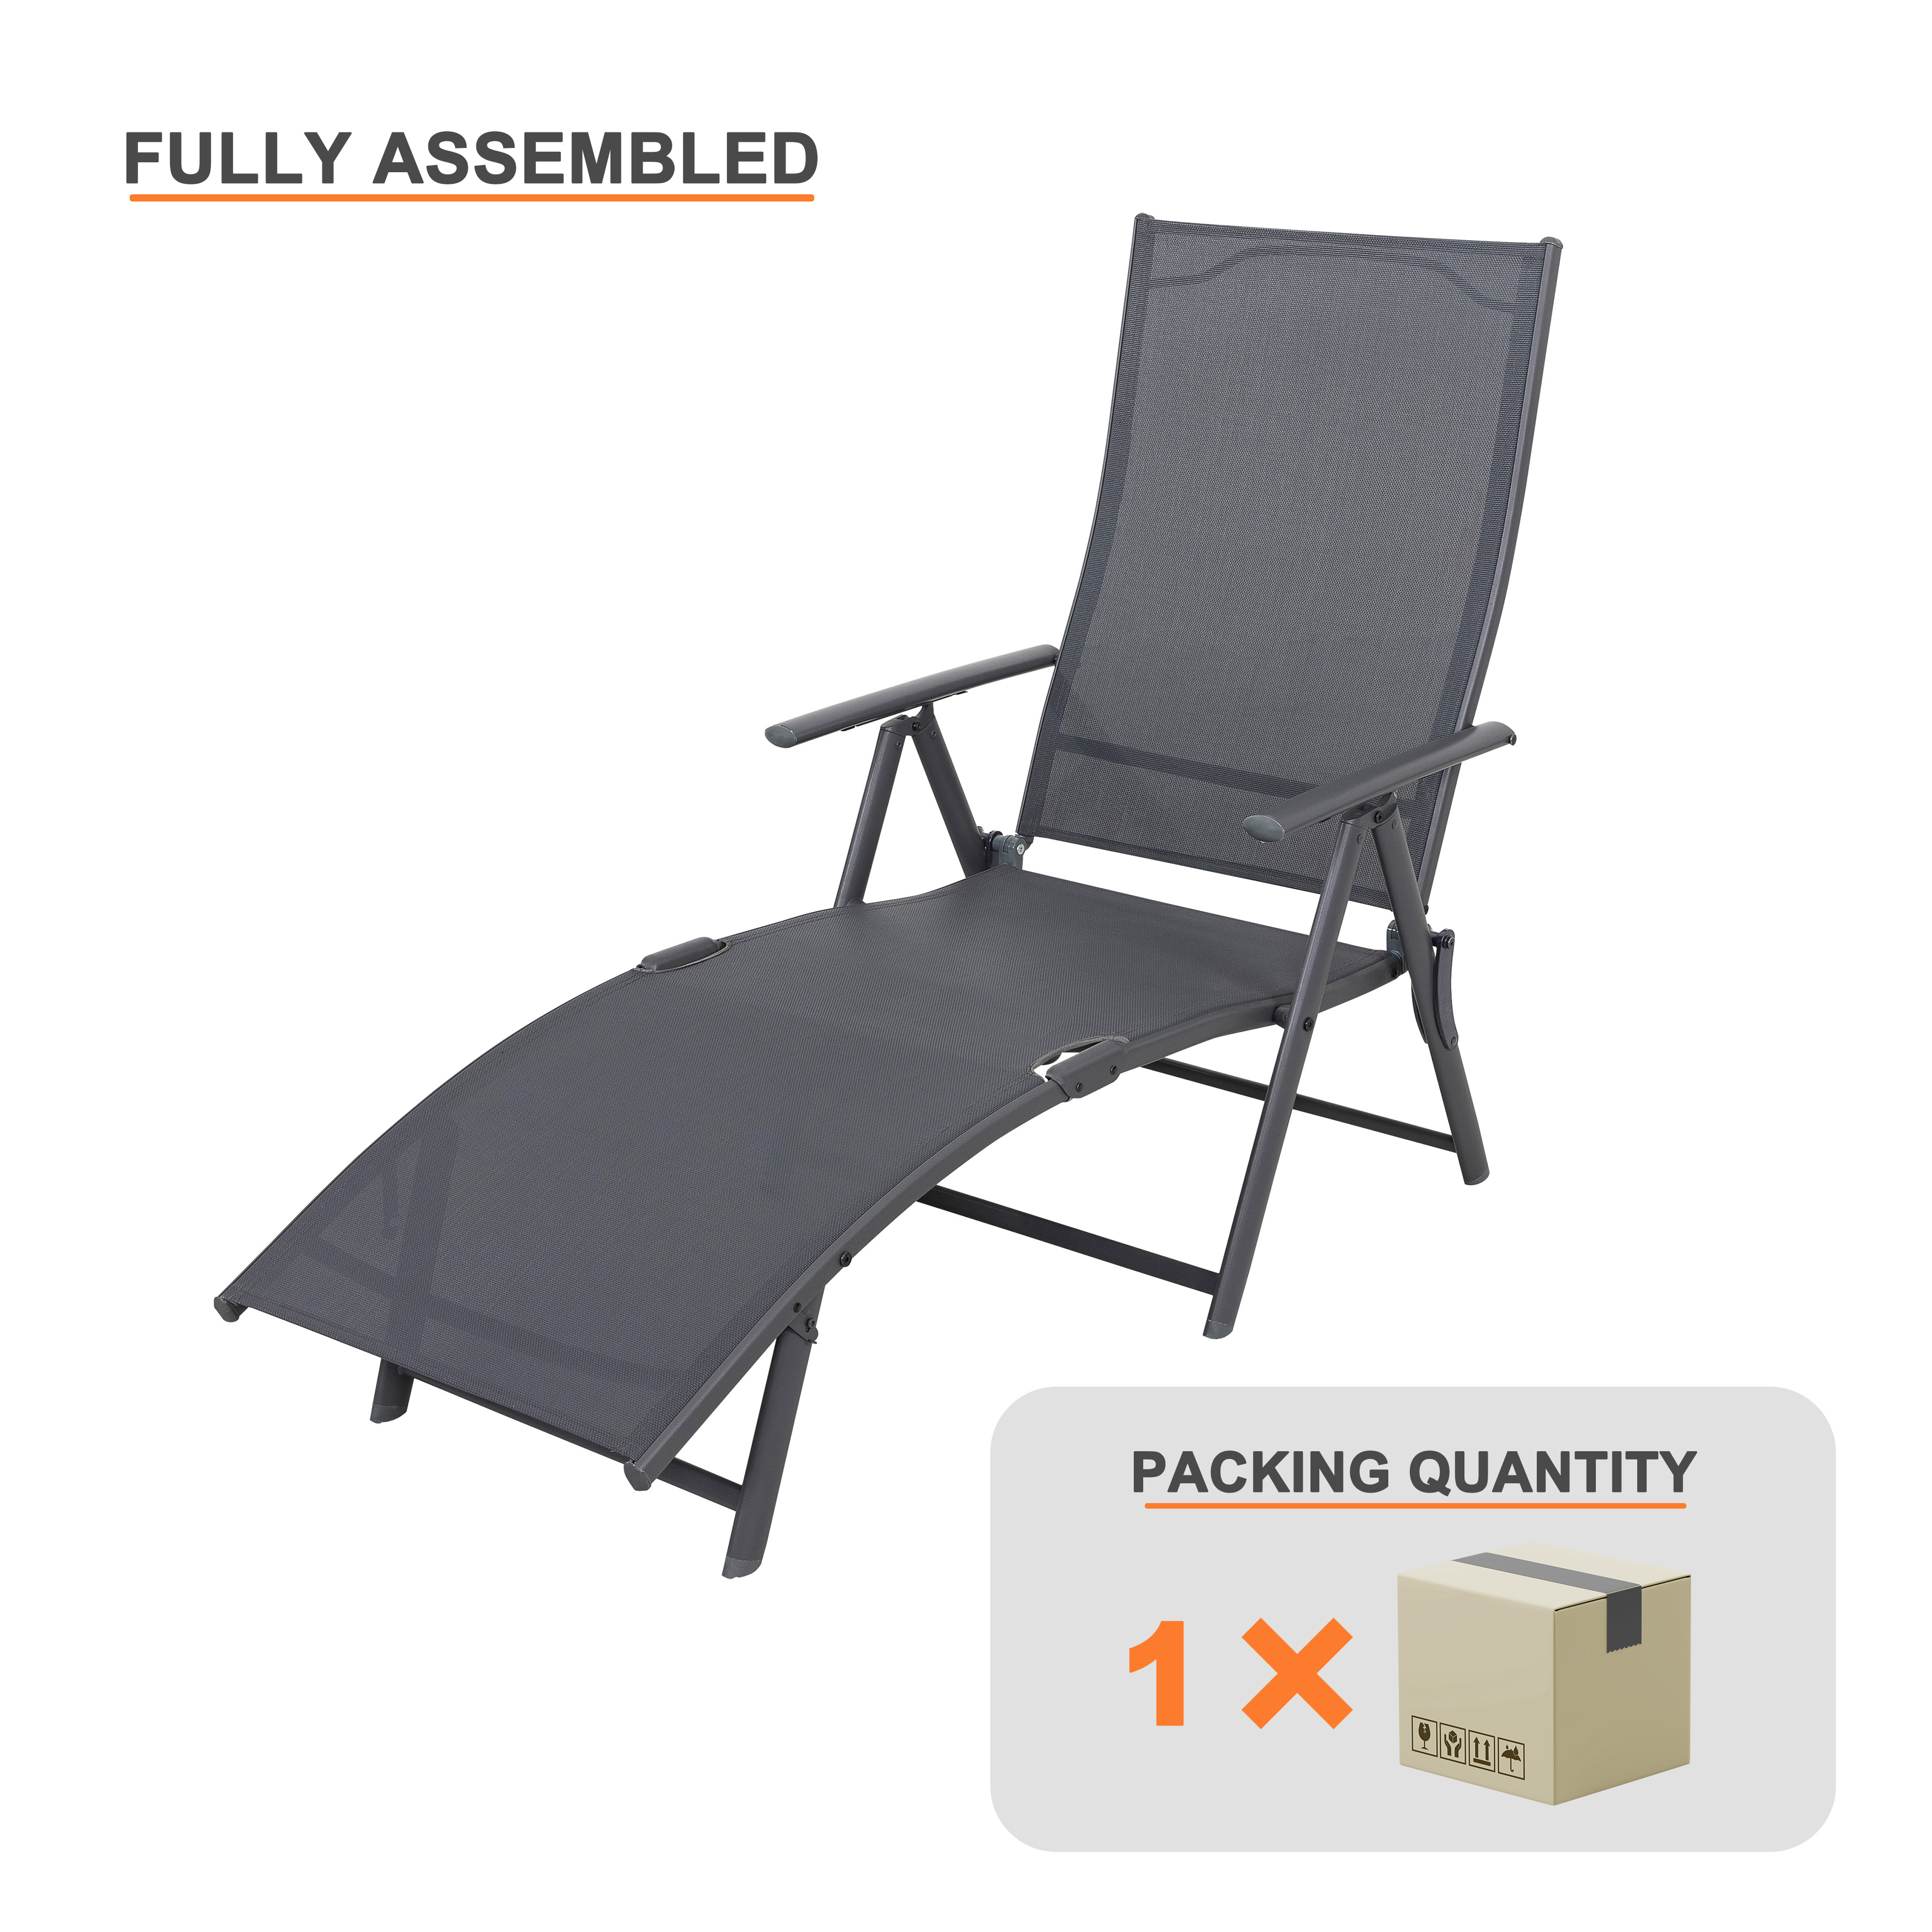 Nuu Garden Outdoor Patio Chaise Lounge Chair, Adjustable Folding Pool Lounger with 6-Position Adjustable Backrest and Breathable Textile Fabric, Gray - image 5 of 9